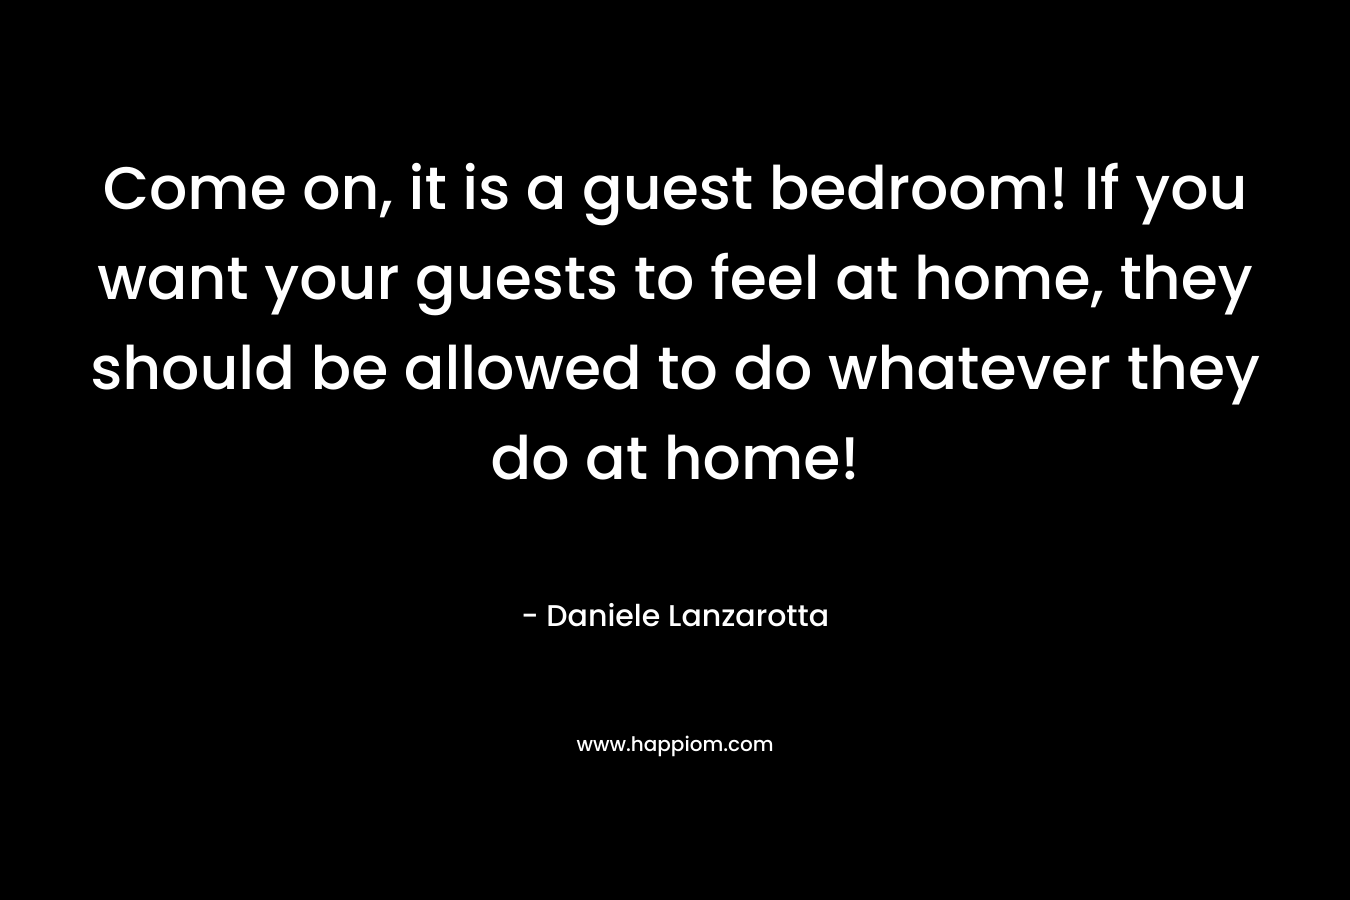 Come on, it is a guest bedroom! If you want your guests to feel at home, they should be allowed to do whatever they do at home!